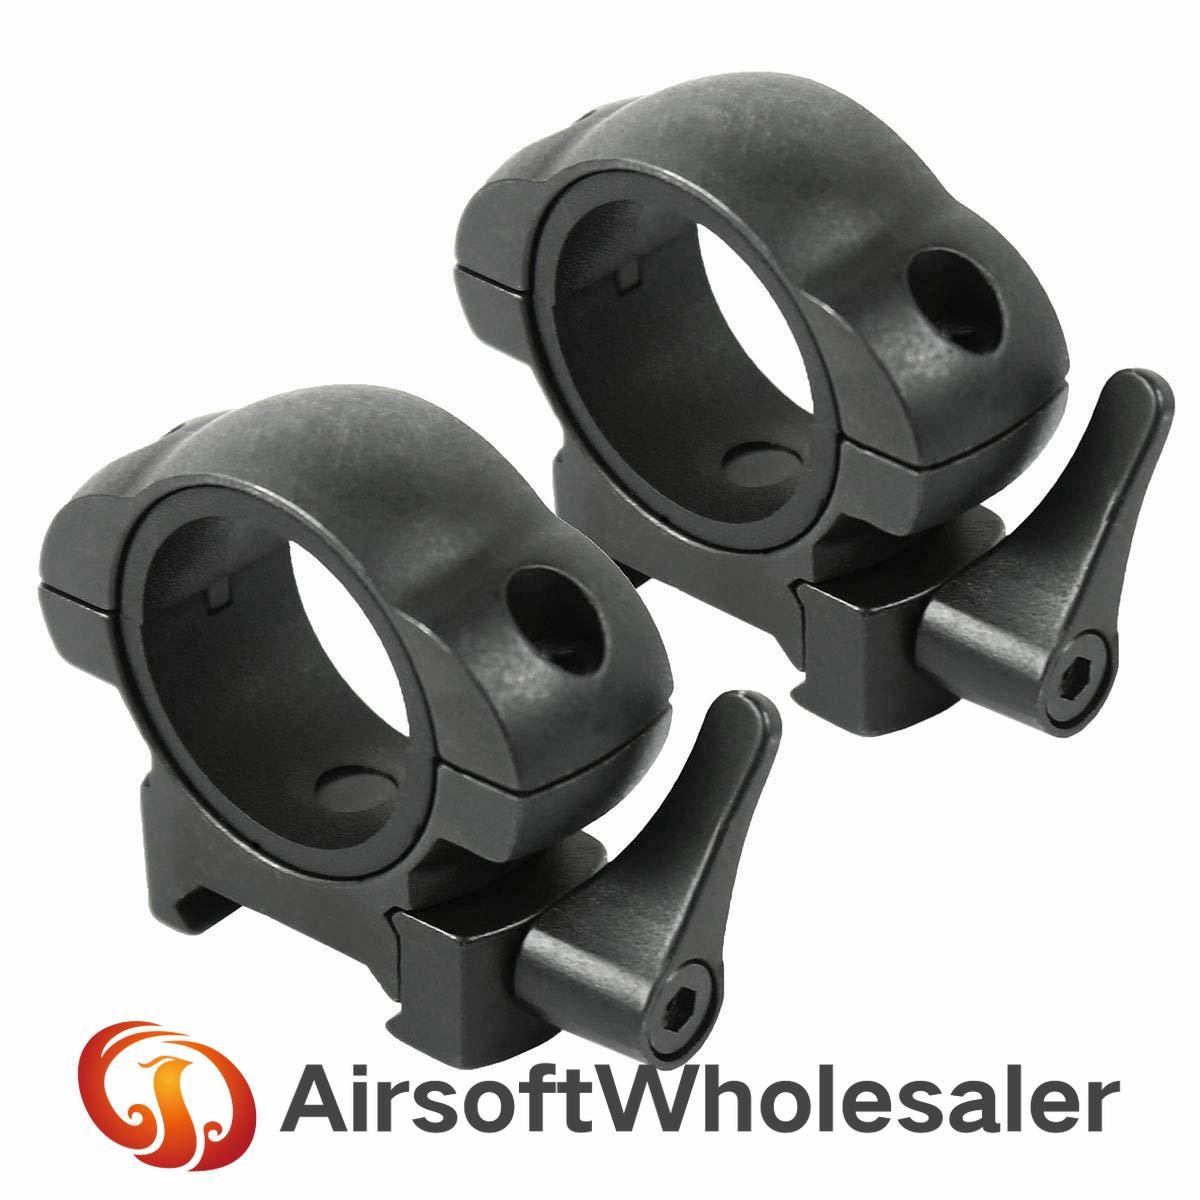 Of Two Steel Qd Rifle Scope Rings With Picatinny Weaver Scope Mount Low Profile 30mm And 1 Inch Scope Diameter From Airsoftwholesaler 14 56 Dhgate Com